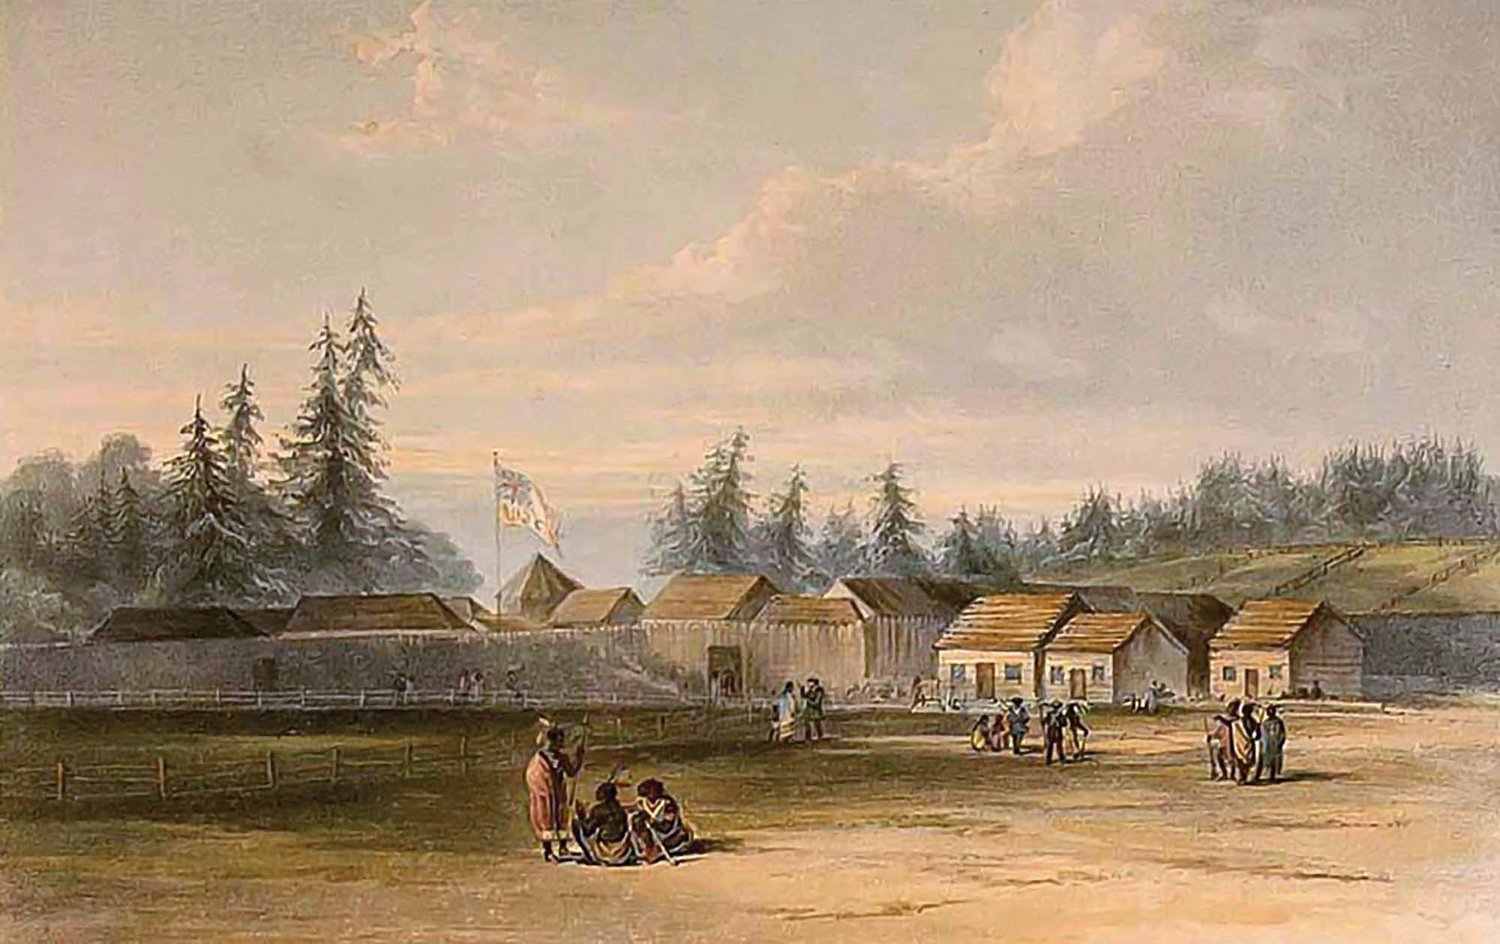 Fort Vancouver is pictured in the sketch by Lt. Henry Warre in 1845.